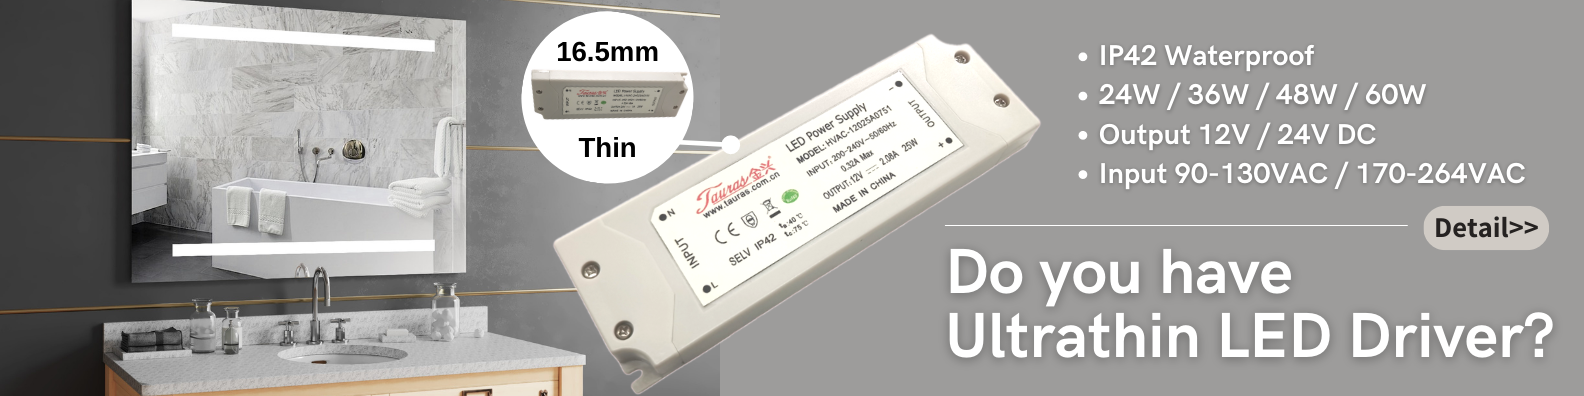 do you have ultrathin led driver1